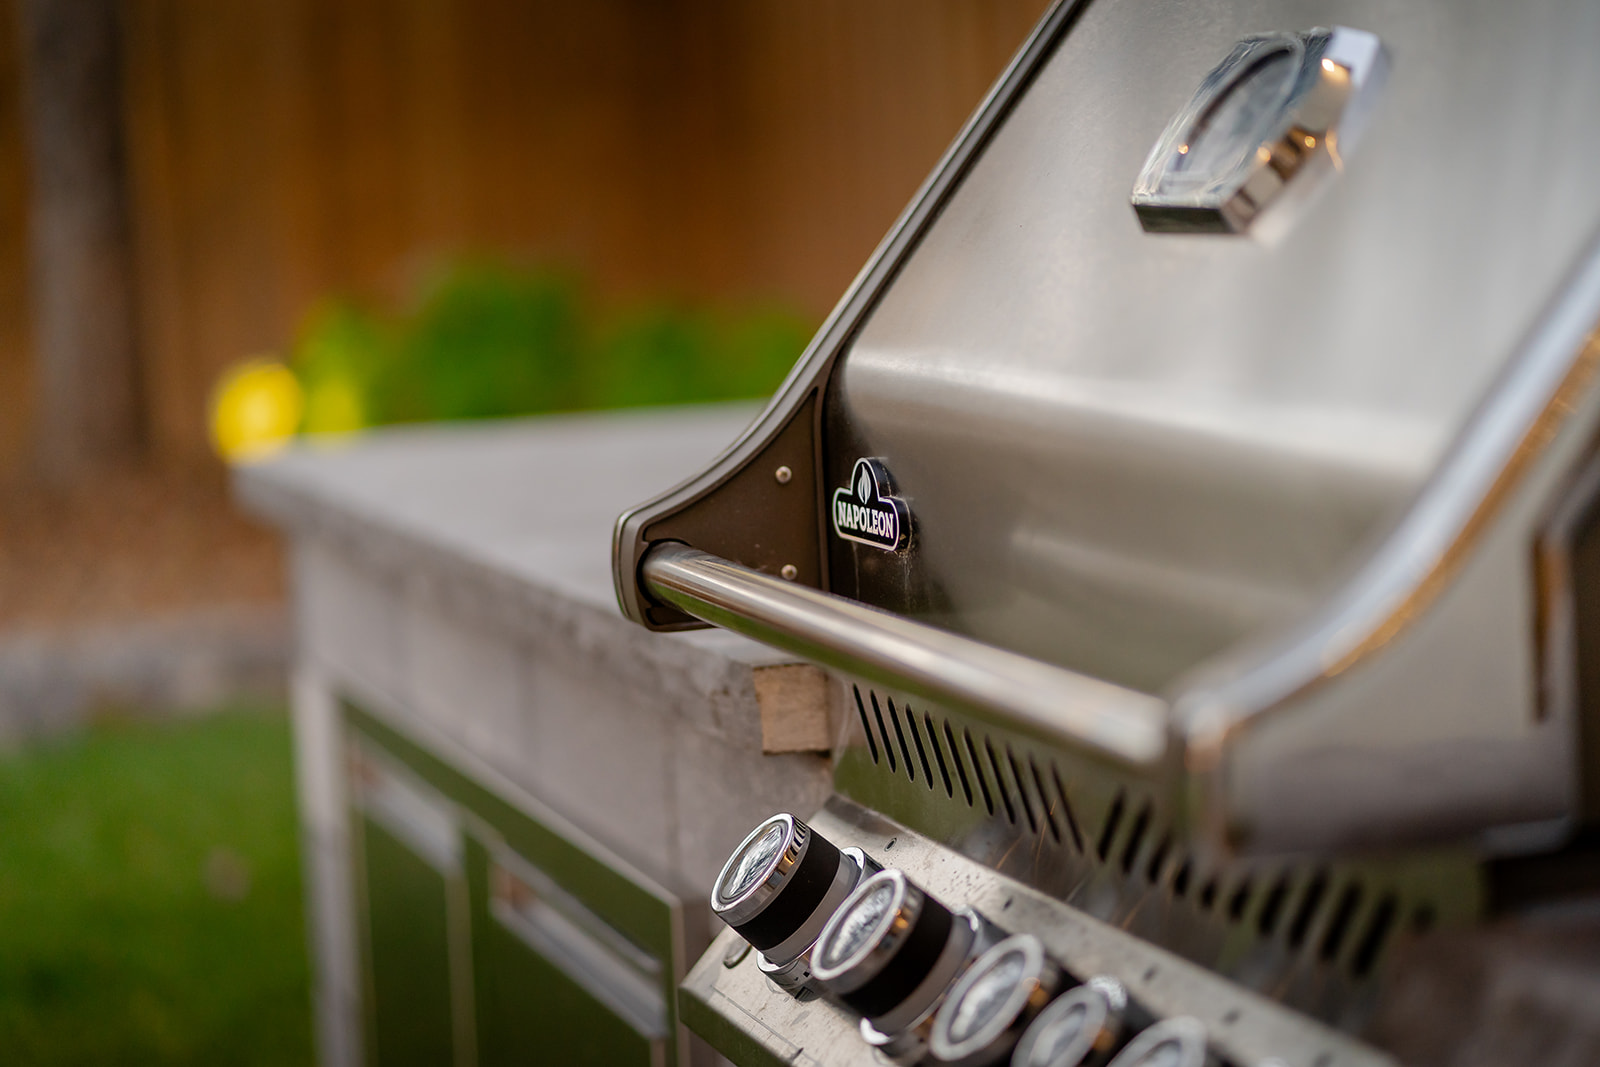 A silver barbeque outside.